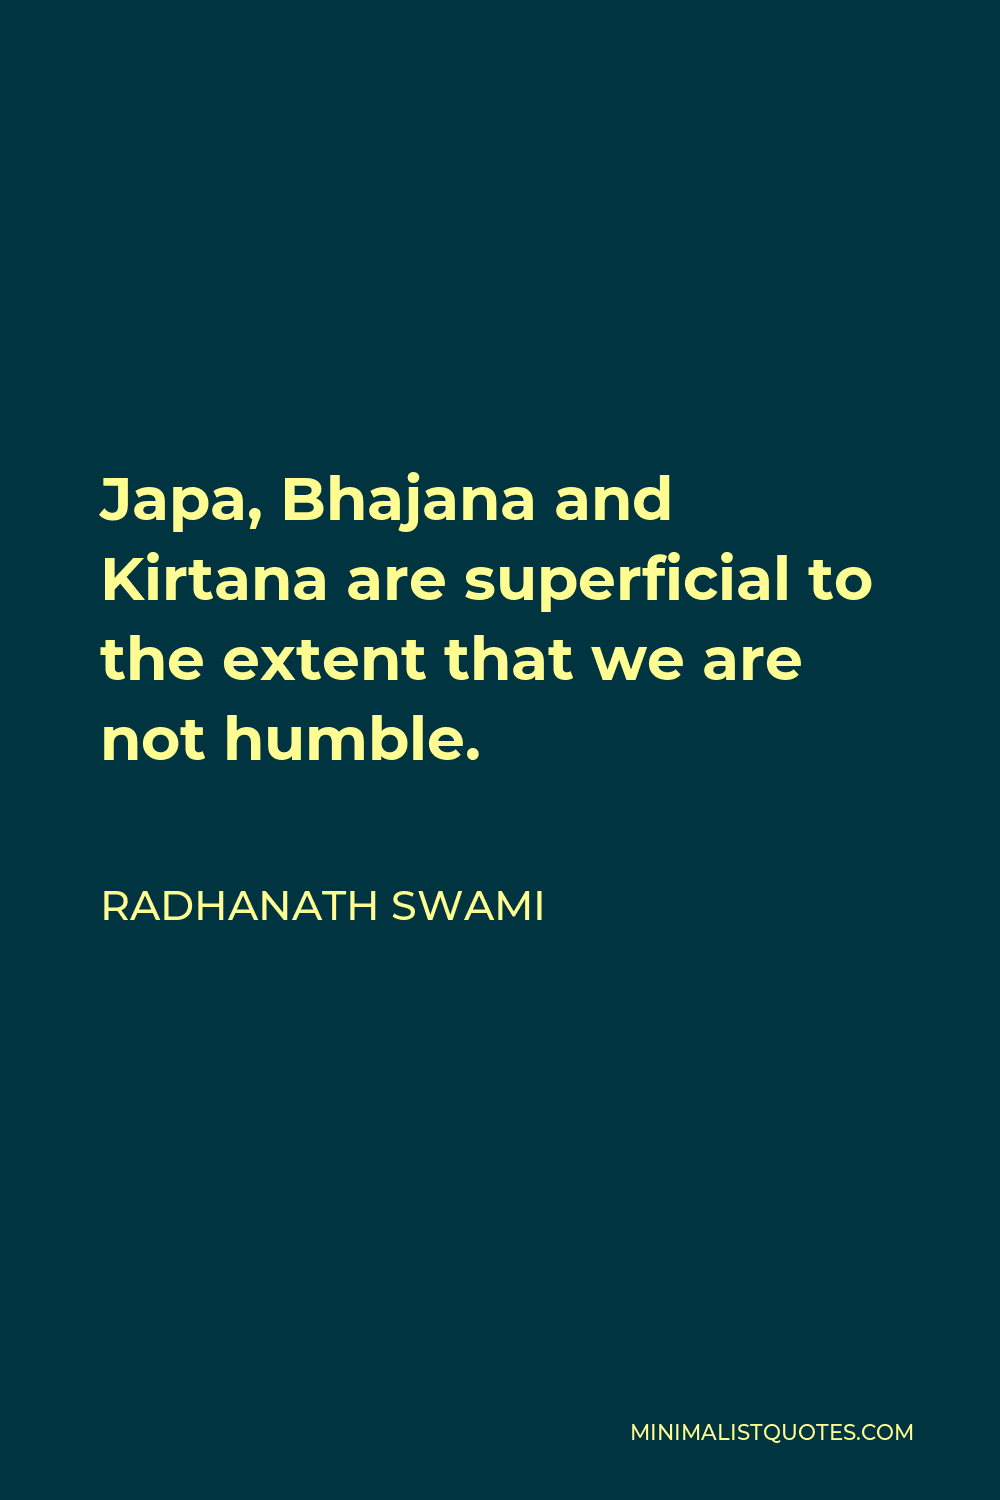 Radhanath Swami Quote - Japa, Bhajana and Kirtana are superficial to the extent that we are not humble.